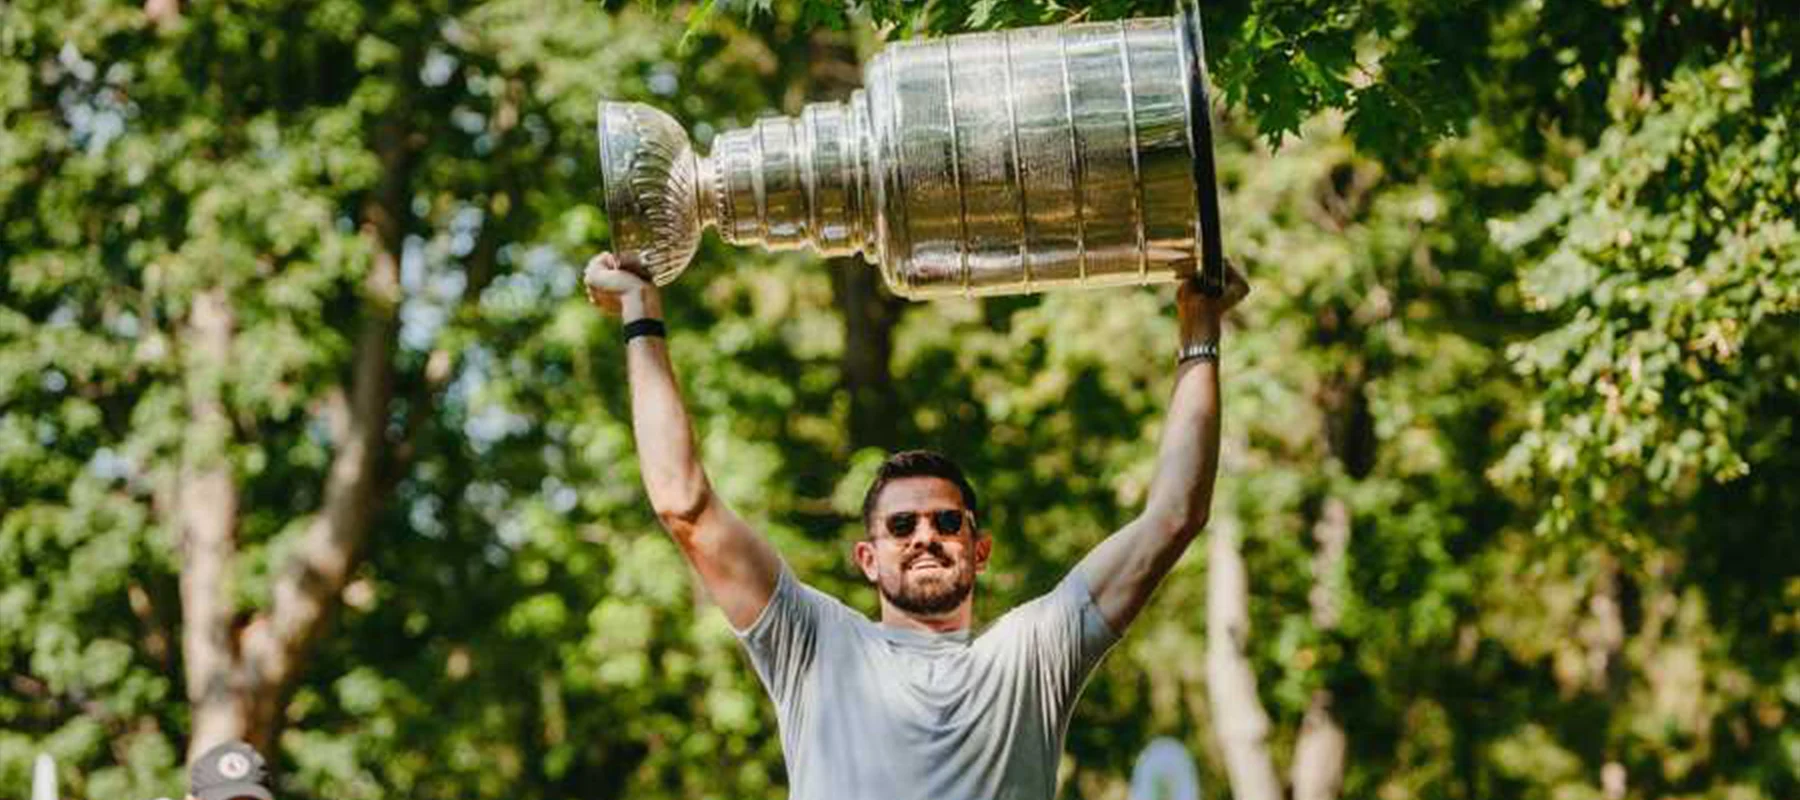 Stanley Cup Champ Alex Killorn Shares Heart Rate, Strain, Sleep &#038; Recovery from Title-Winning Season